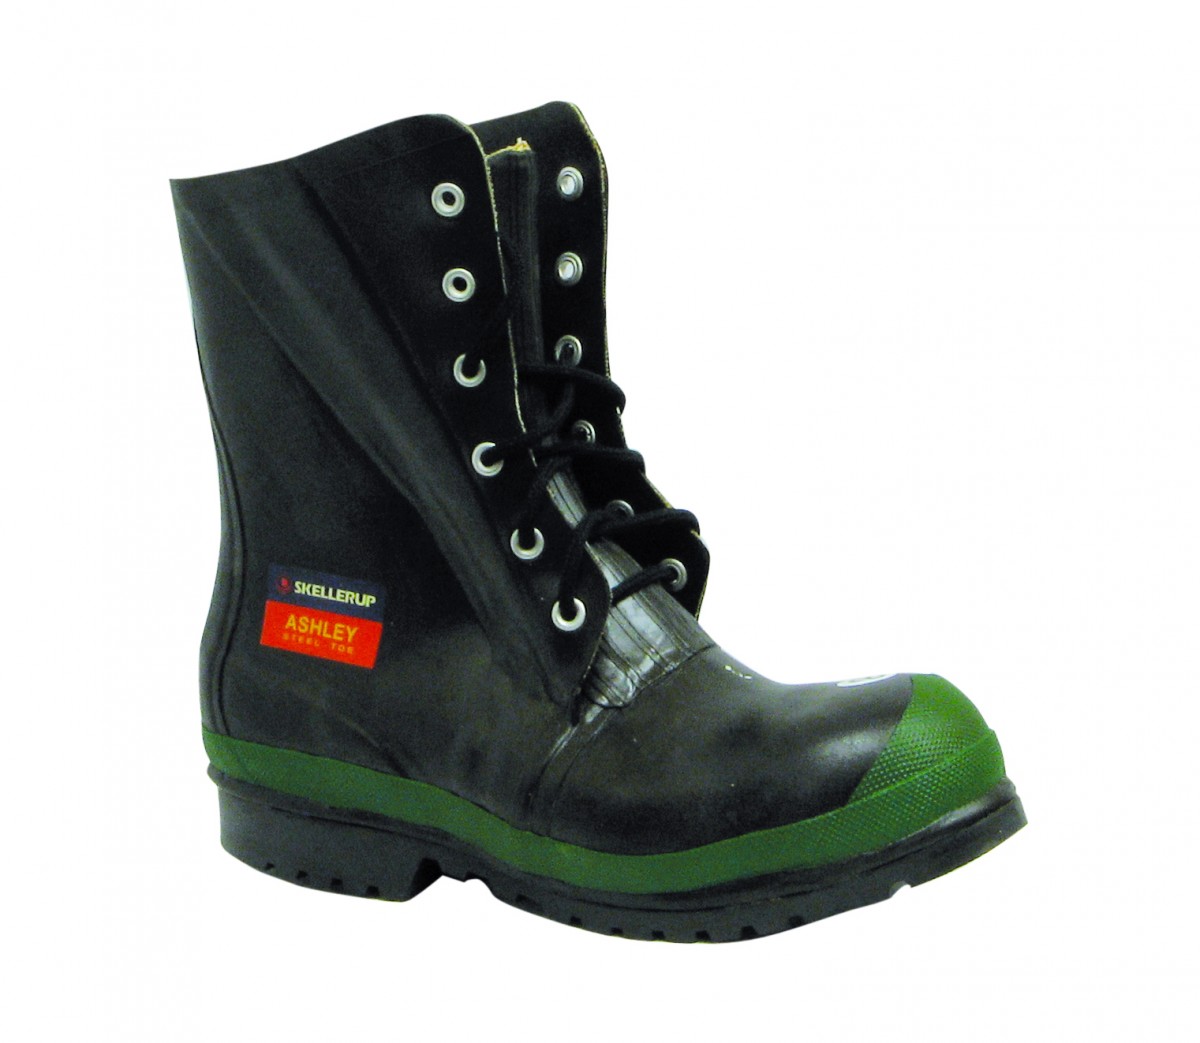 Ashley Rubber Gumboot Laceup Steel Toe – All sizing out of stock ETA end January